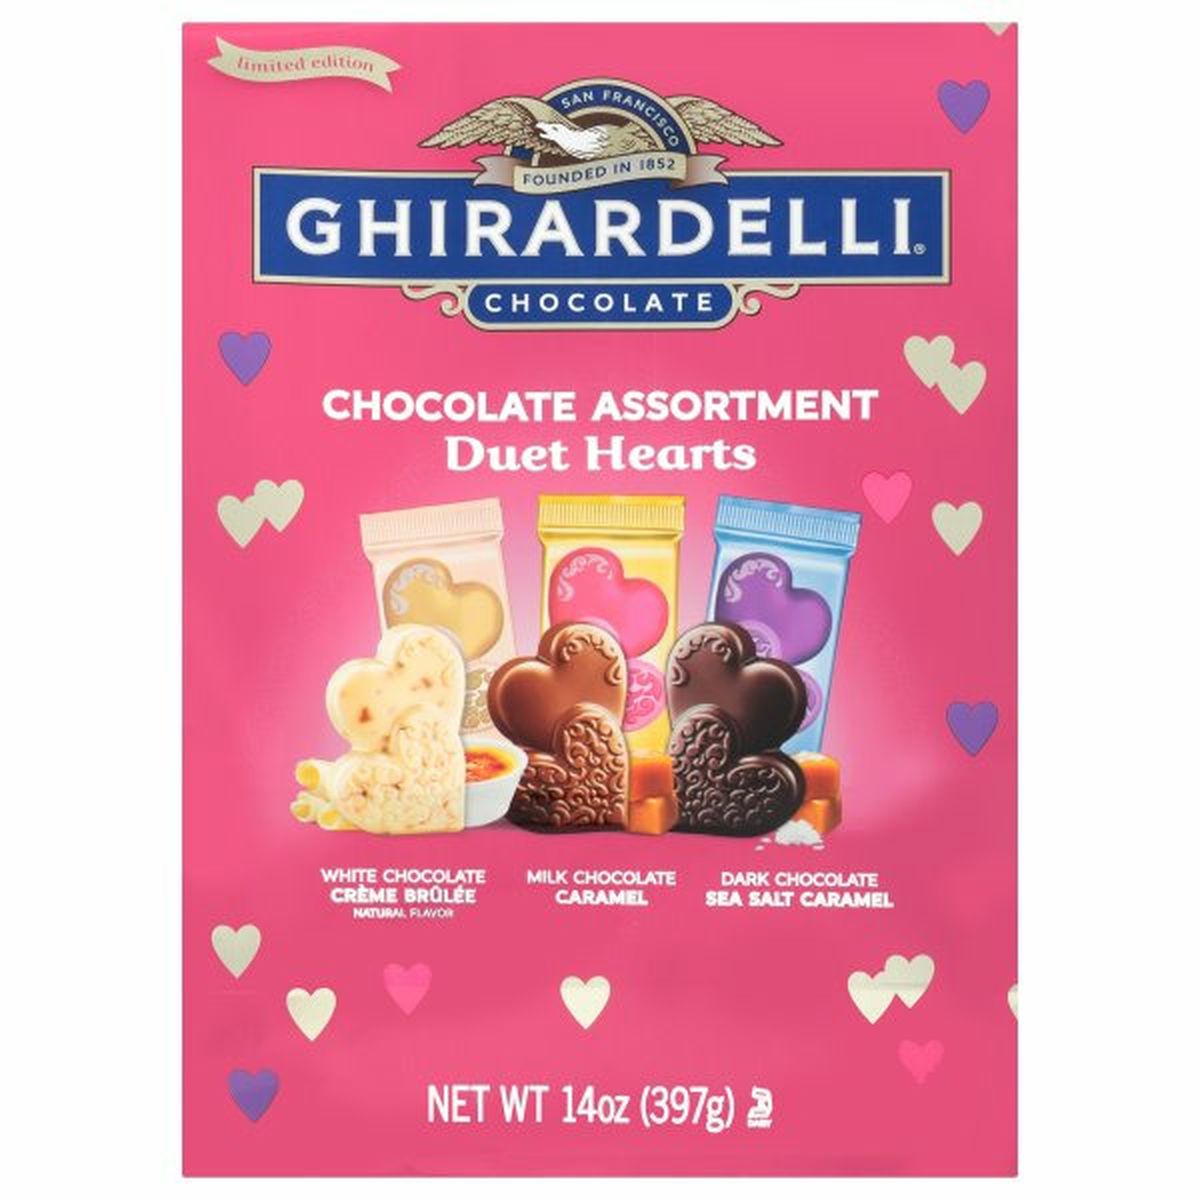 Calories in Ghirardelli Chocolate, Assortment, Duet Hearts